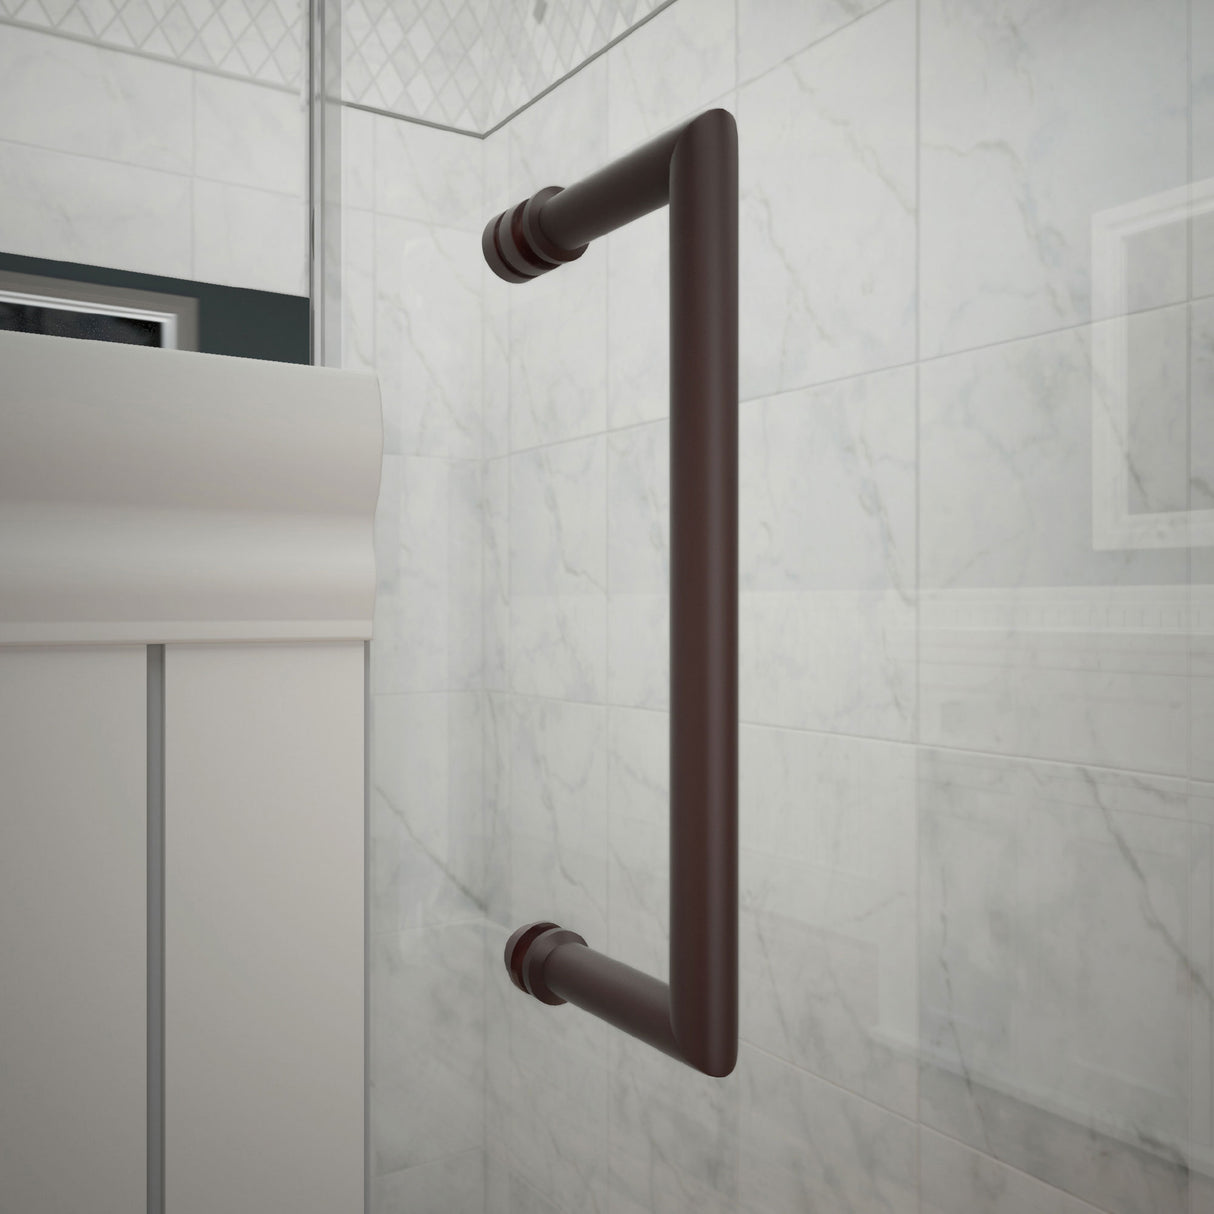 DreamLine Unidoor-X 46 in. W x 30 3/8 in. D x 72 in. H Frameless Hinged Shower Enclosure in Oil Rubbed Bronze